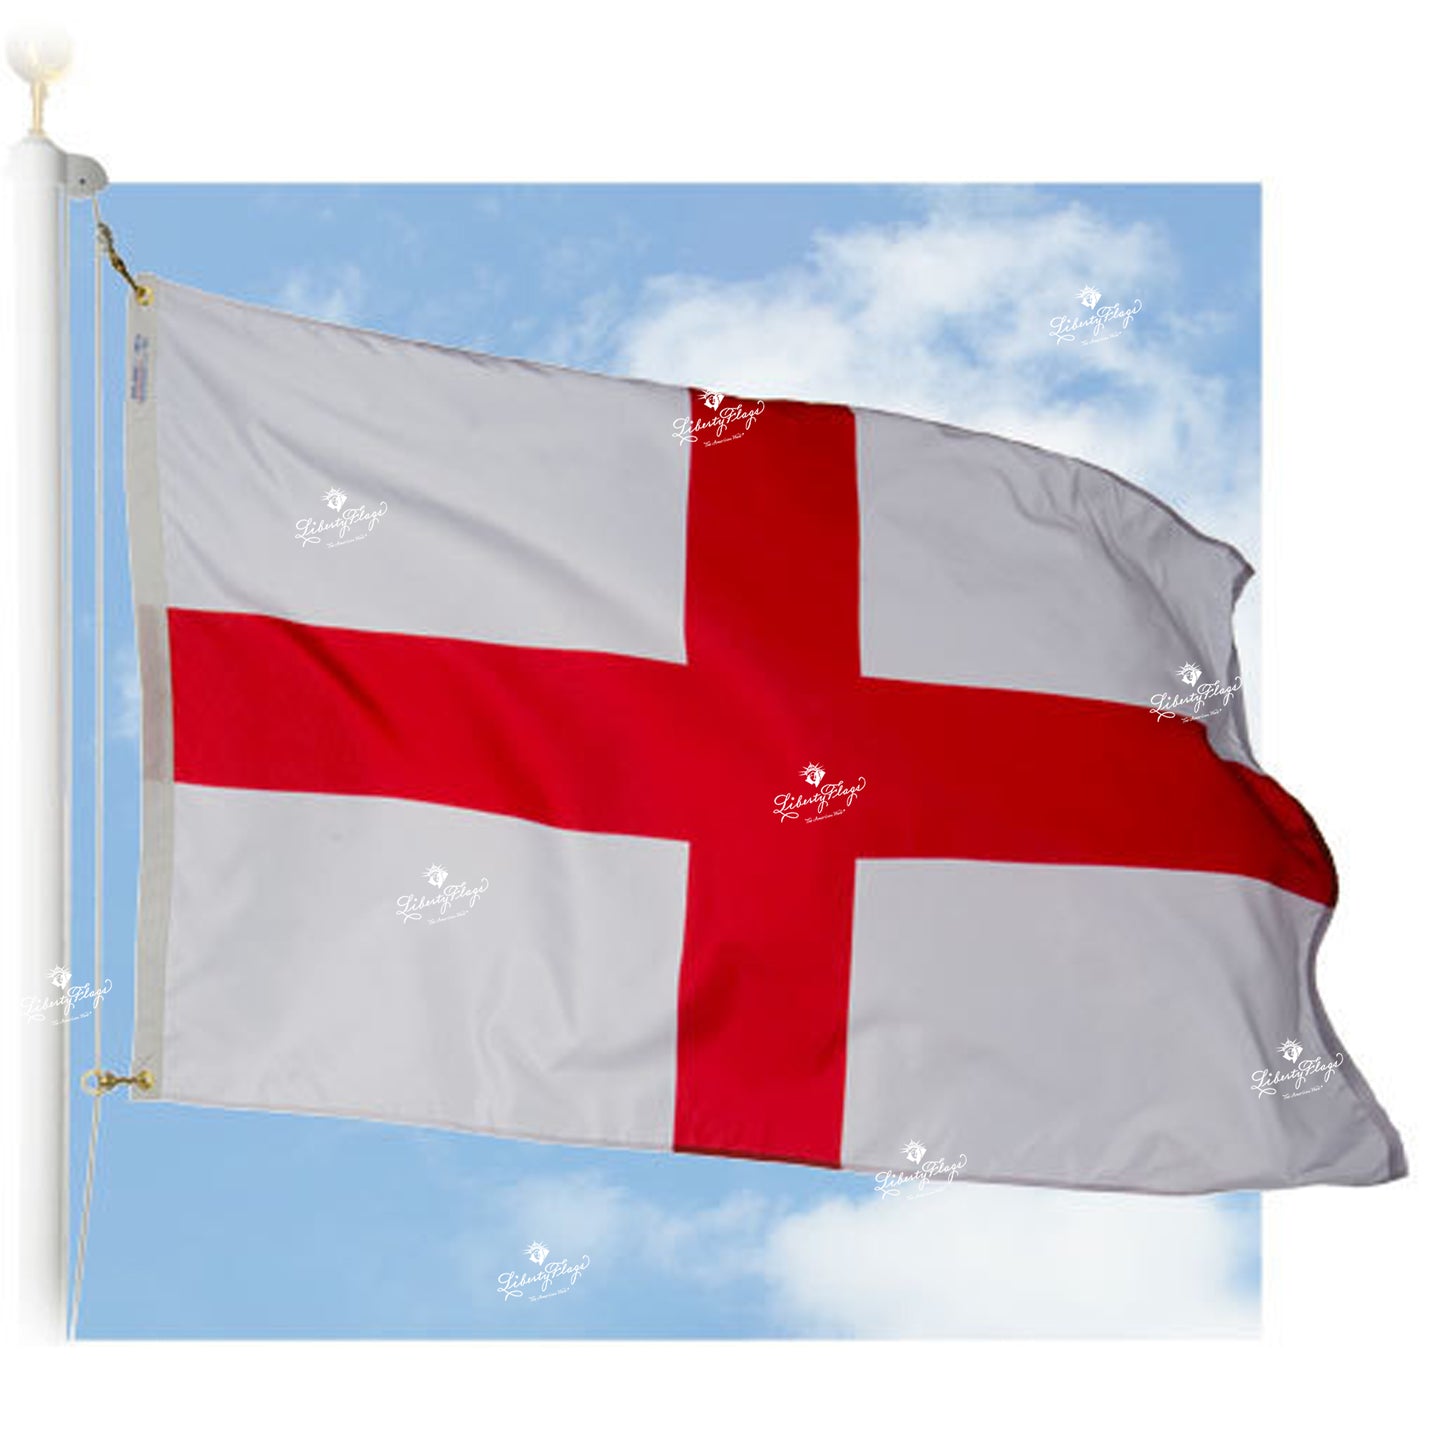 St. George Cross Outdoor Historic Flags